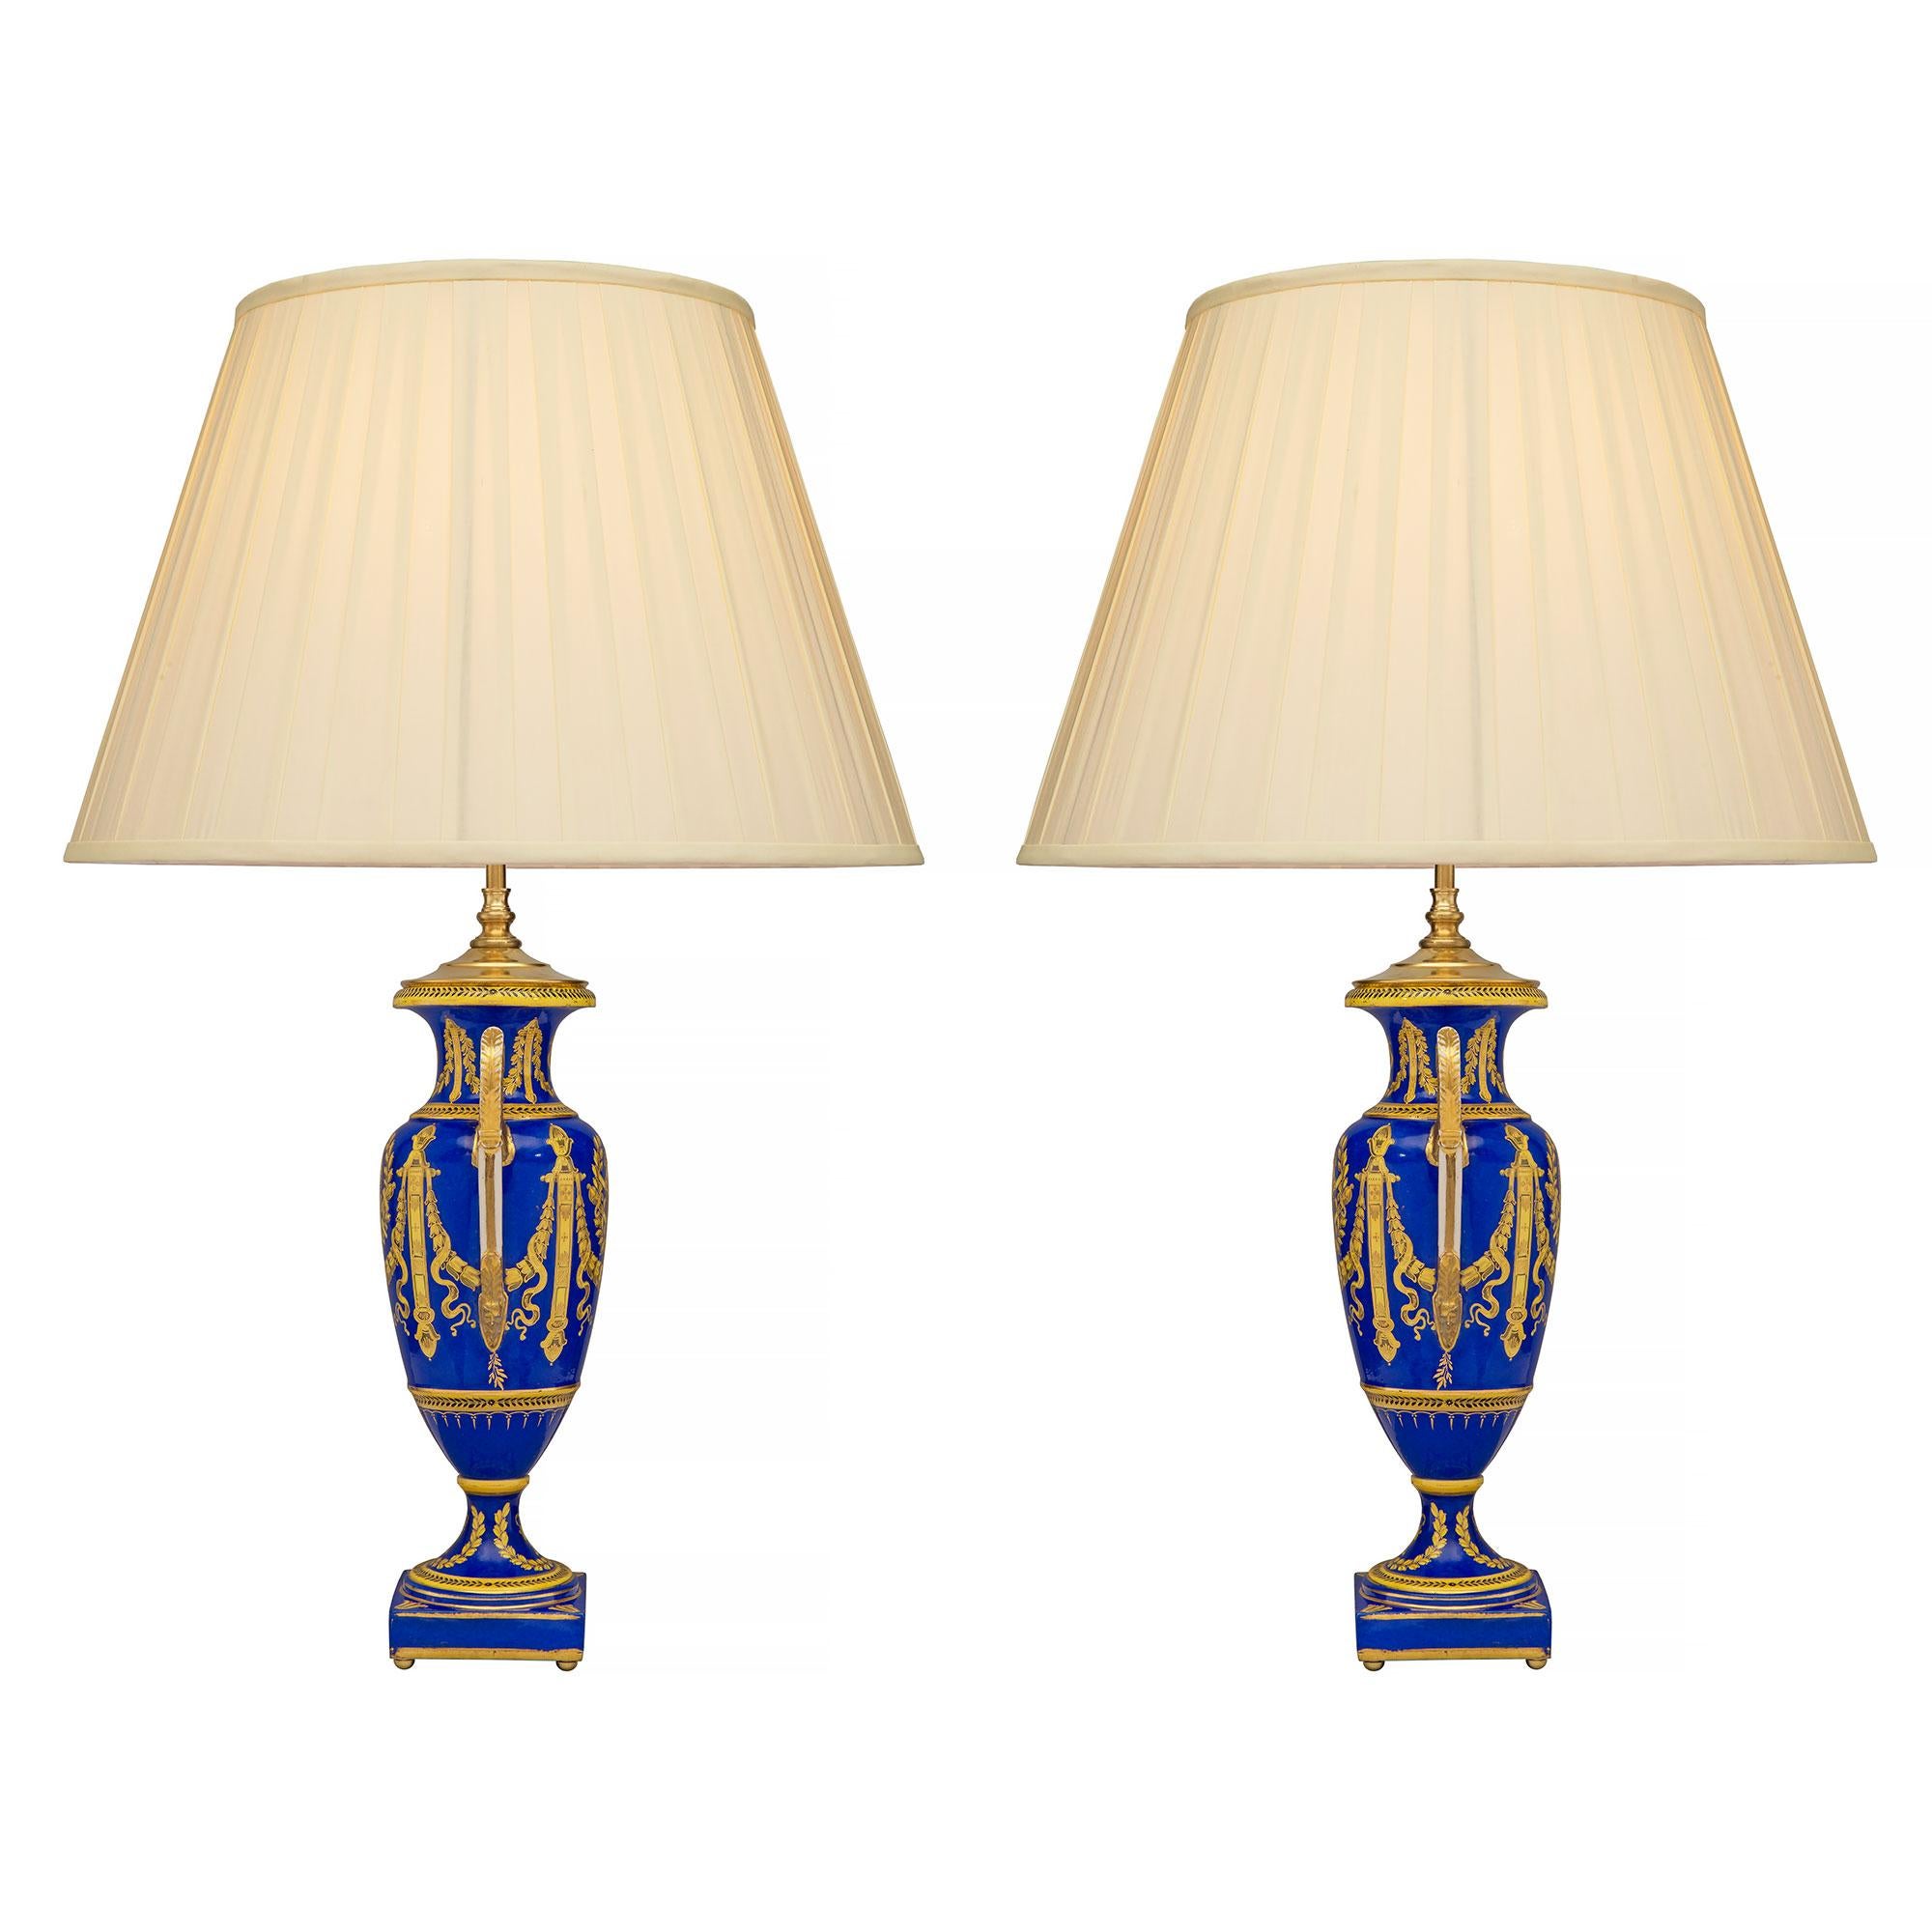 Gilt Pair of French 19th Century Neoclassical Style Porcelain Lamps